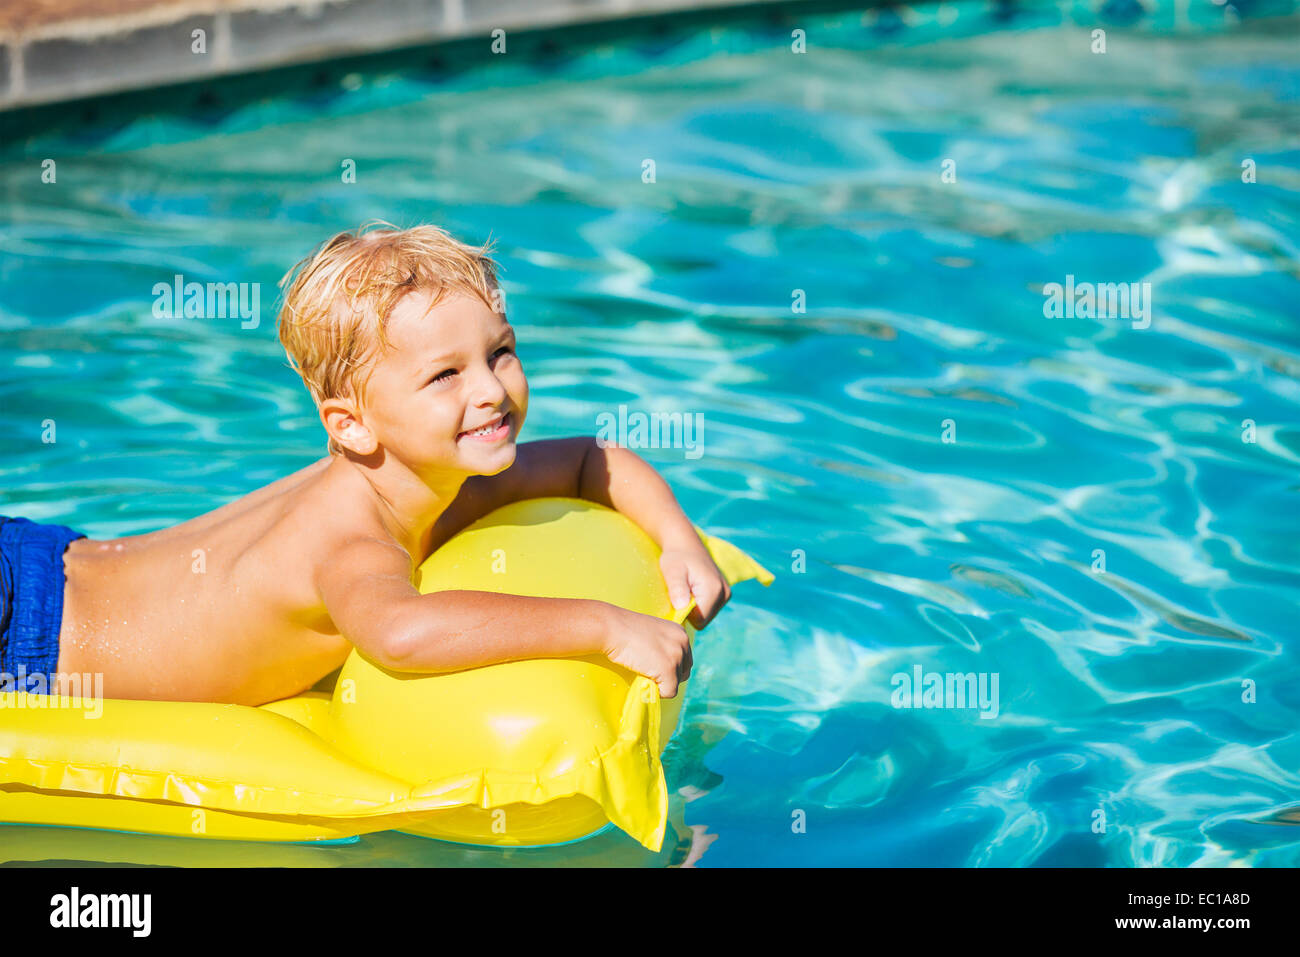 Young Boy Relaxing and Having Fun in Swimming Pool on Yellow Raft. Summer Vacation Fun. Relaxing Lifestyle Concept. Stock Photo